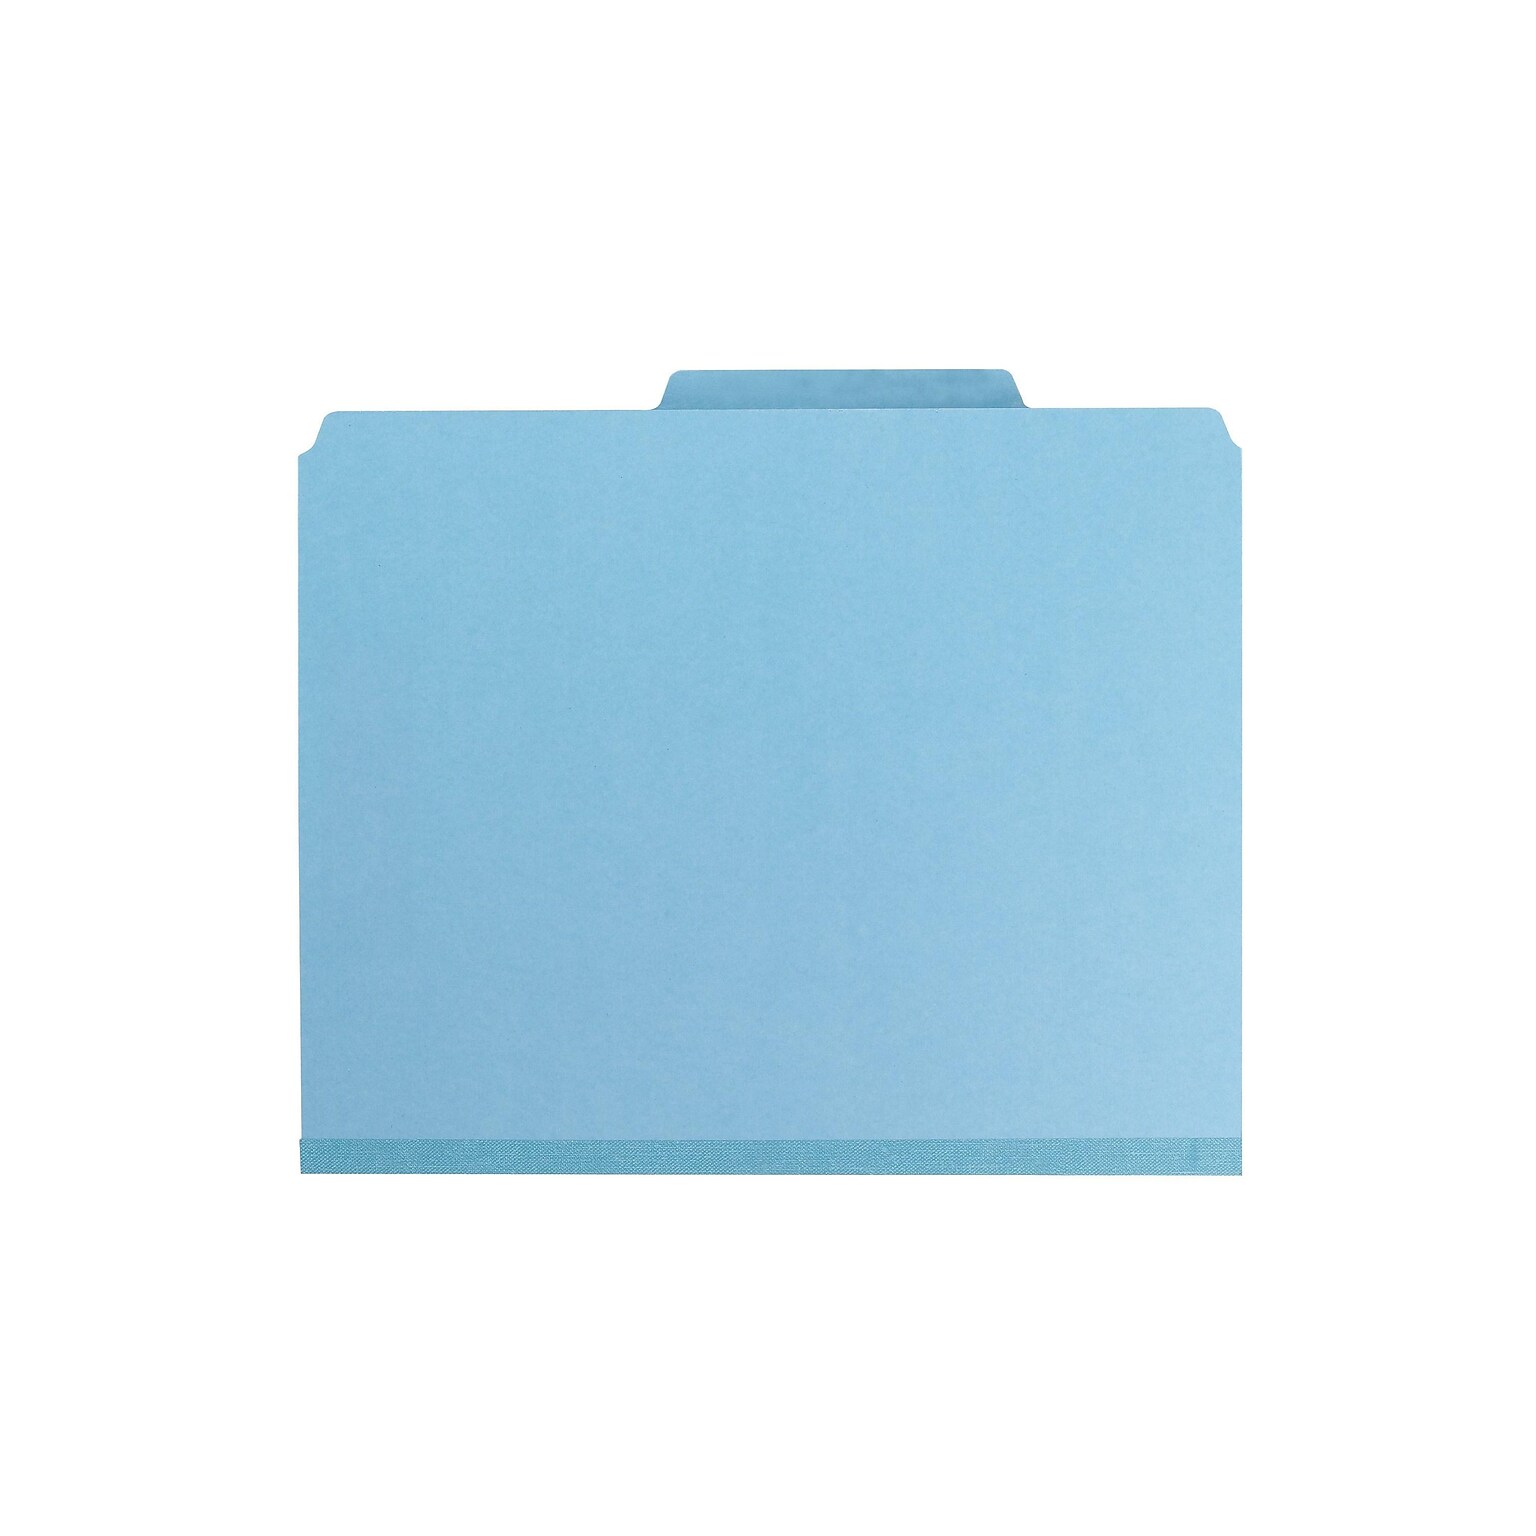 Smead Pressboard Classification Folders with SafeSHIELD Fasteners, 2 Expansion, Letter Size, 1 Divider, Blue, 10/Box (13730)